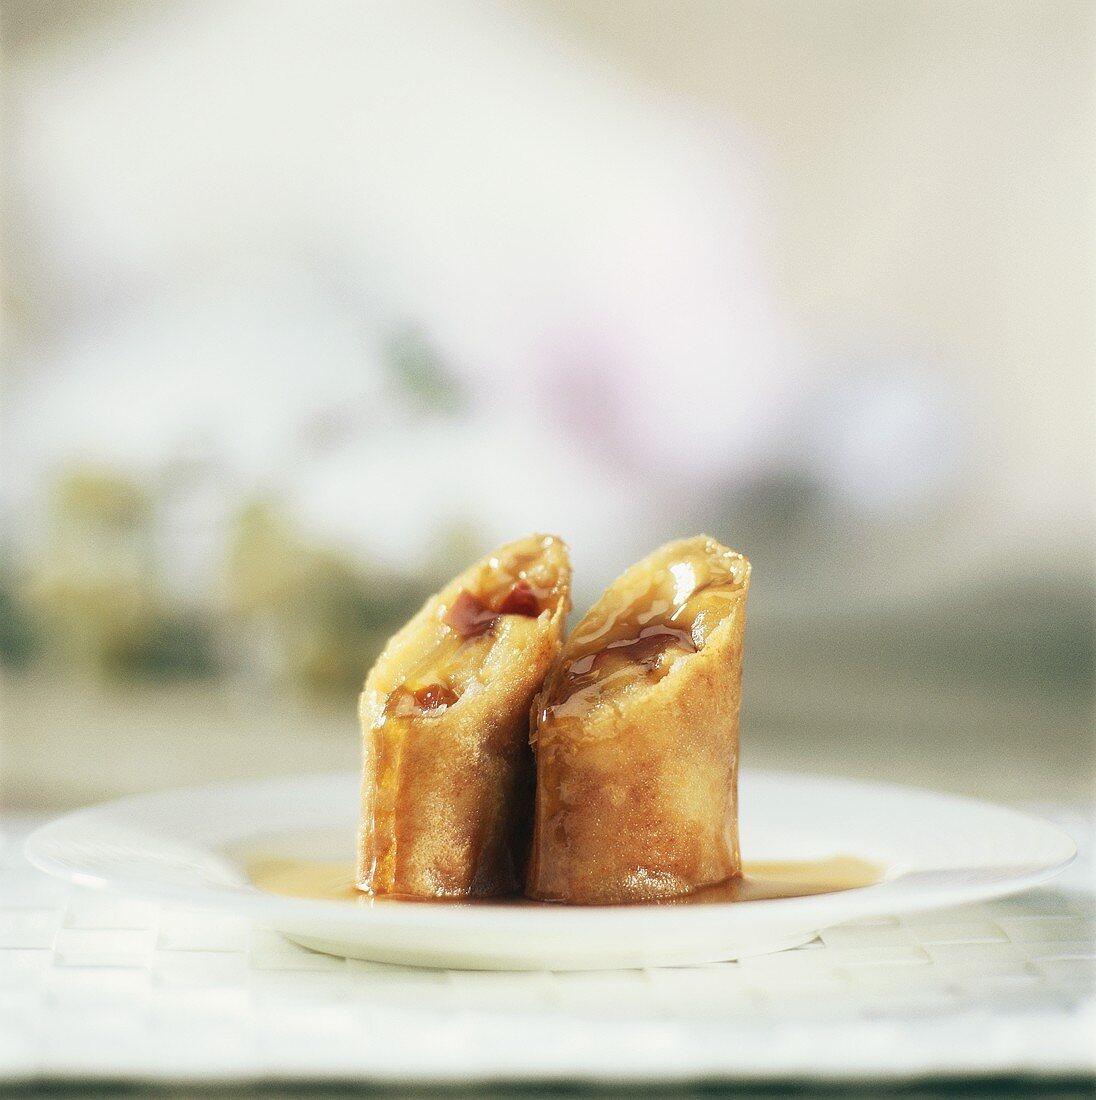 Sweet spring roll with apple and cinnamon filling